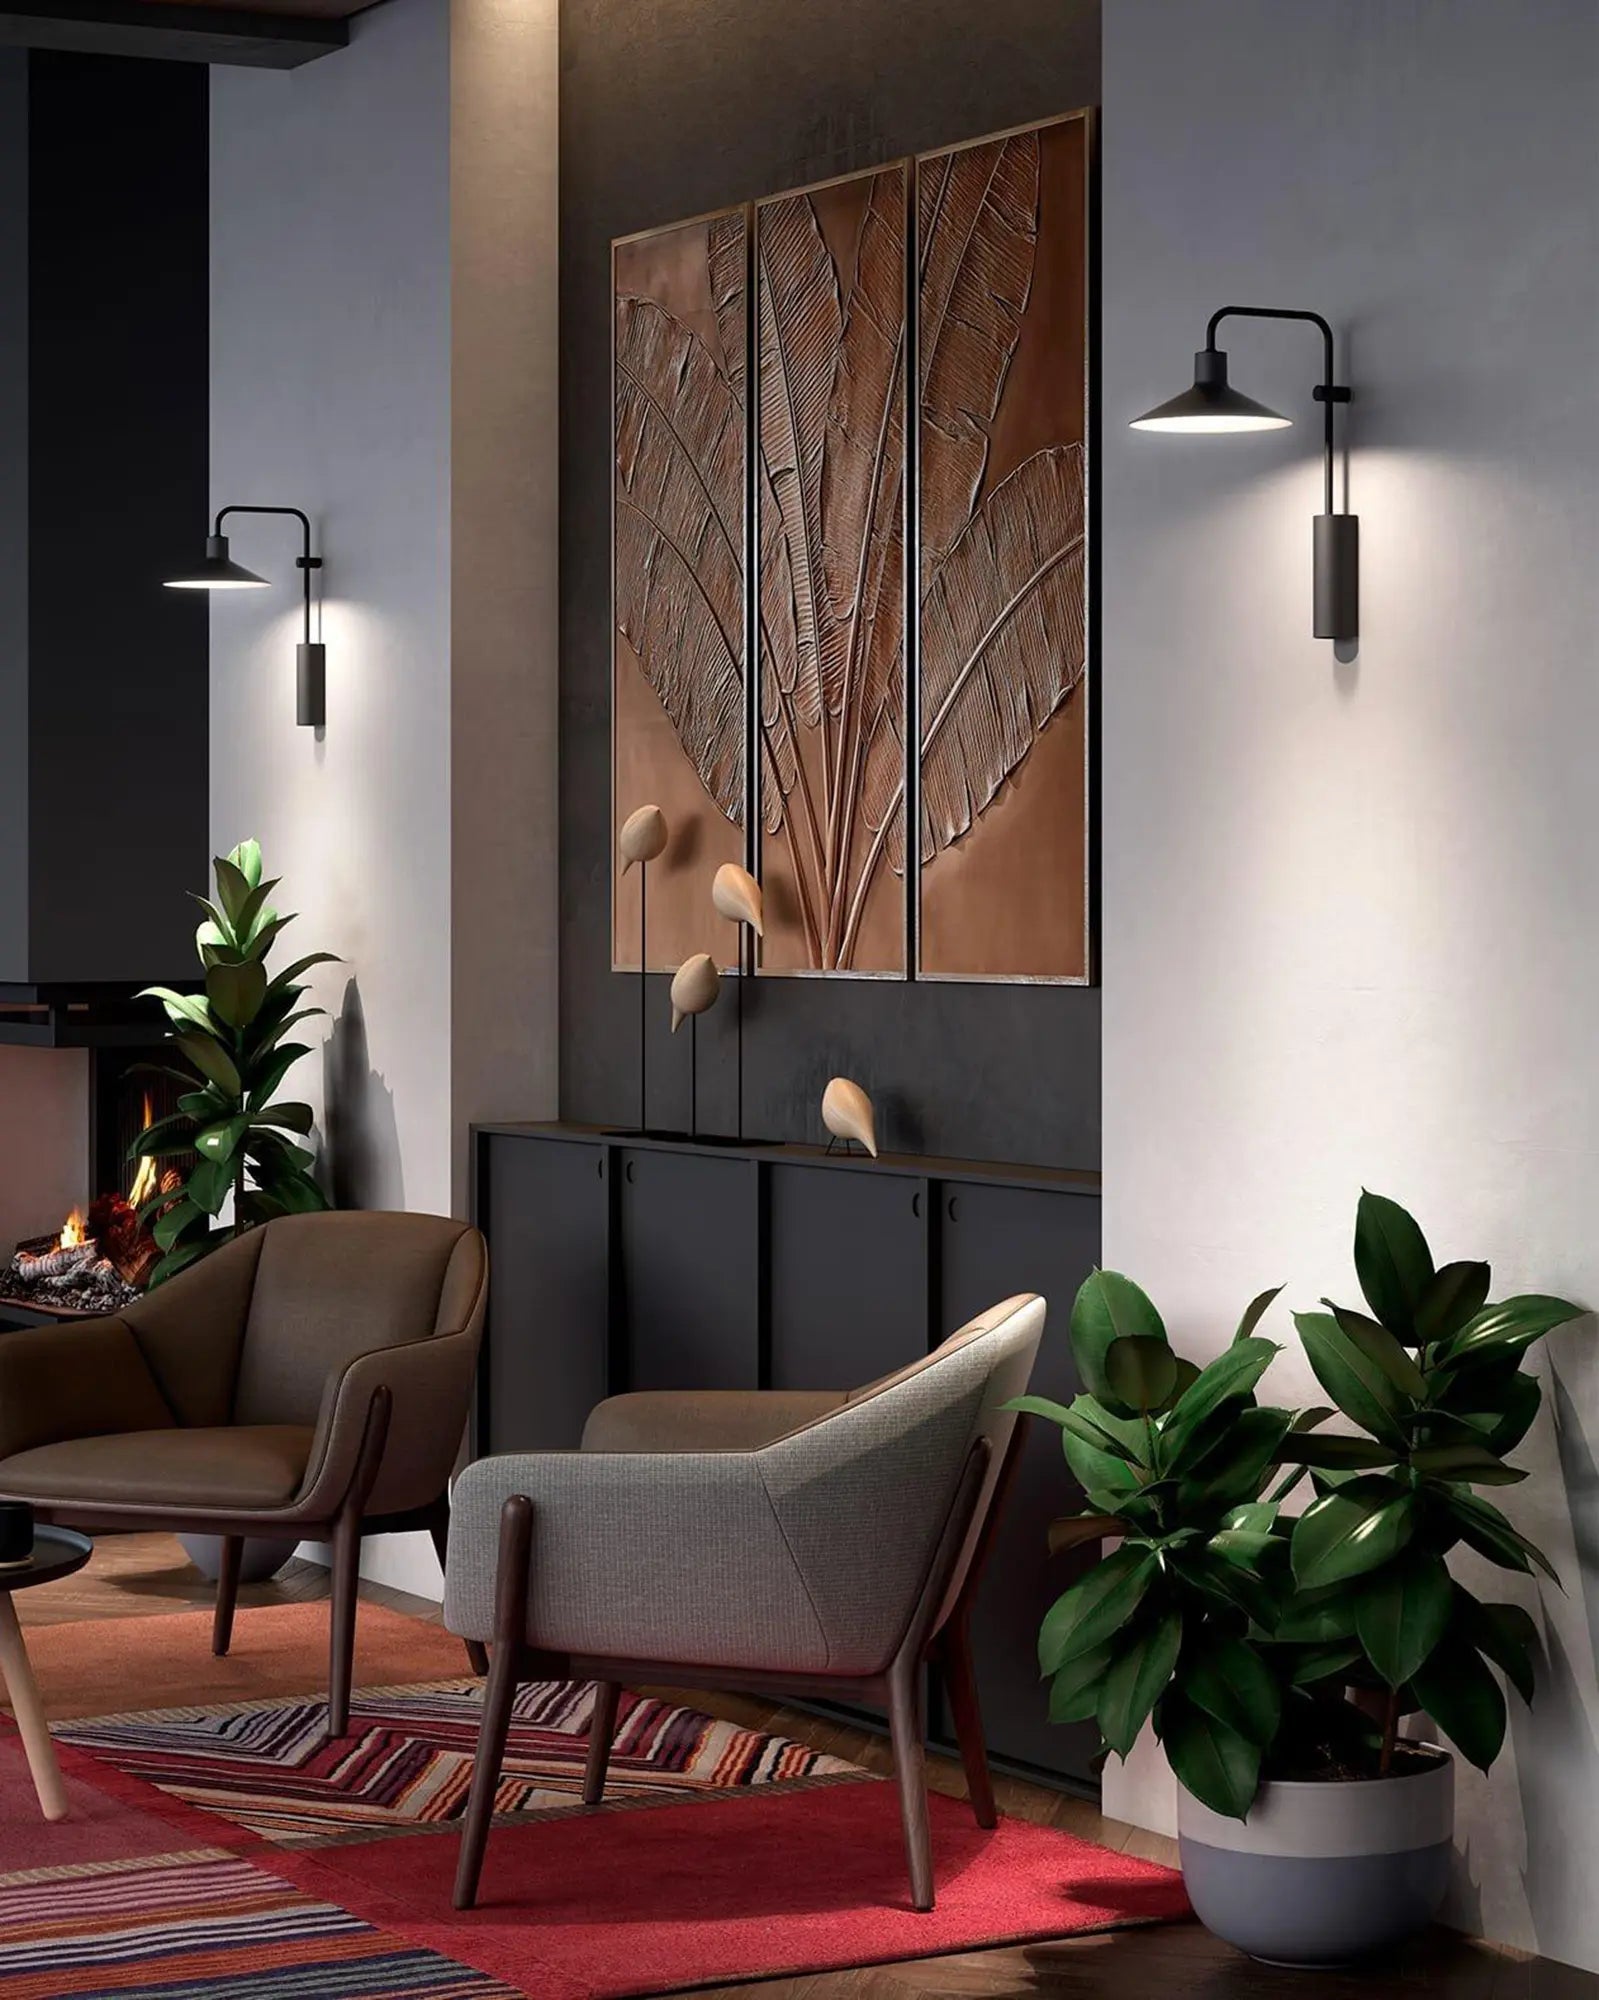 Platet contemporary wall light in a lounge area